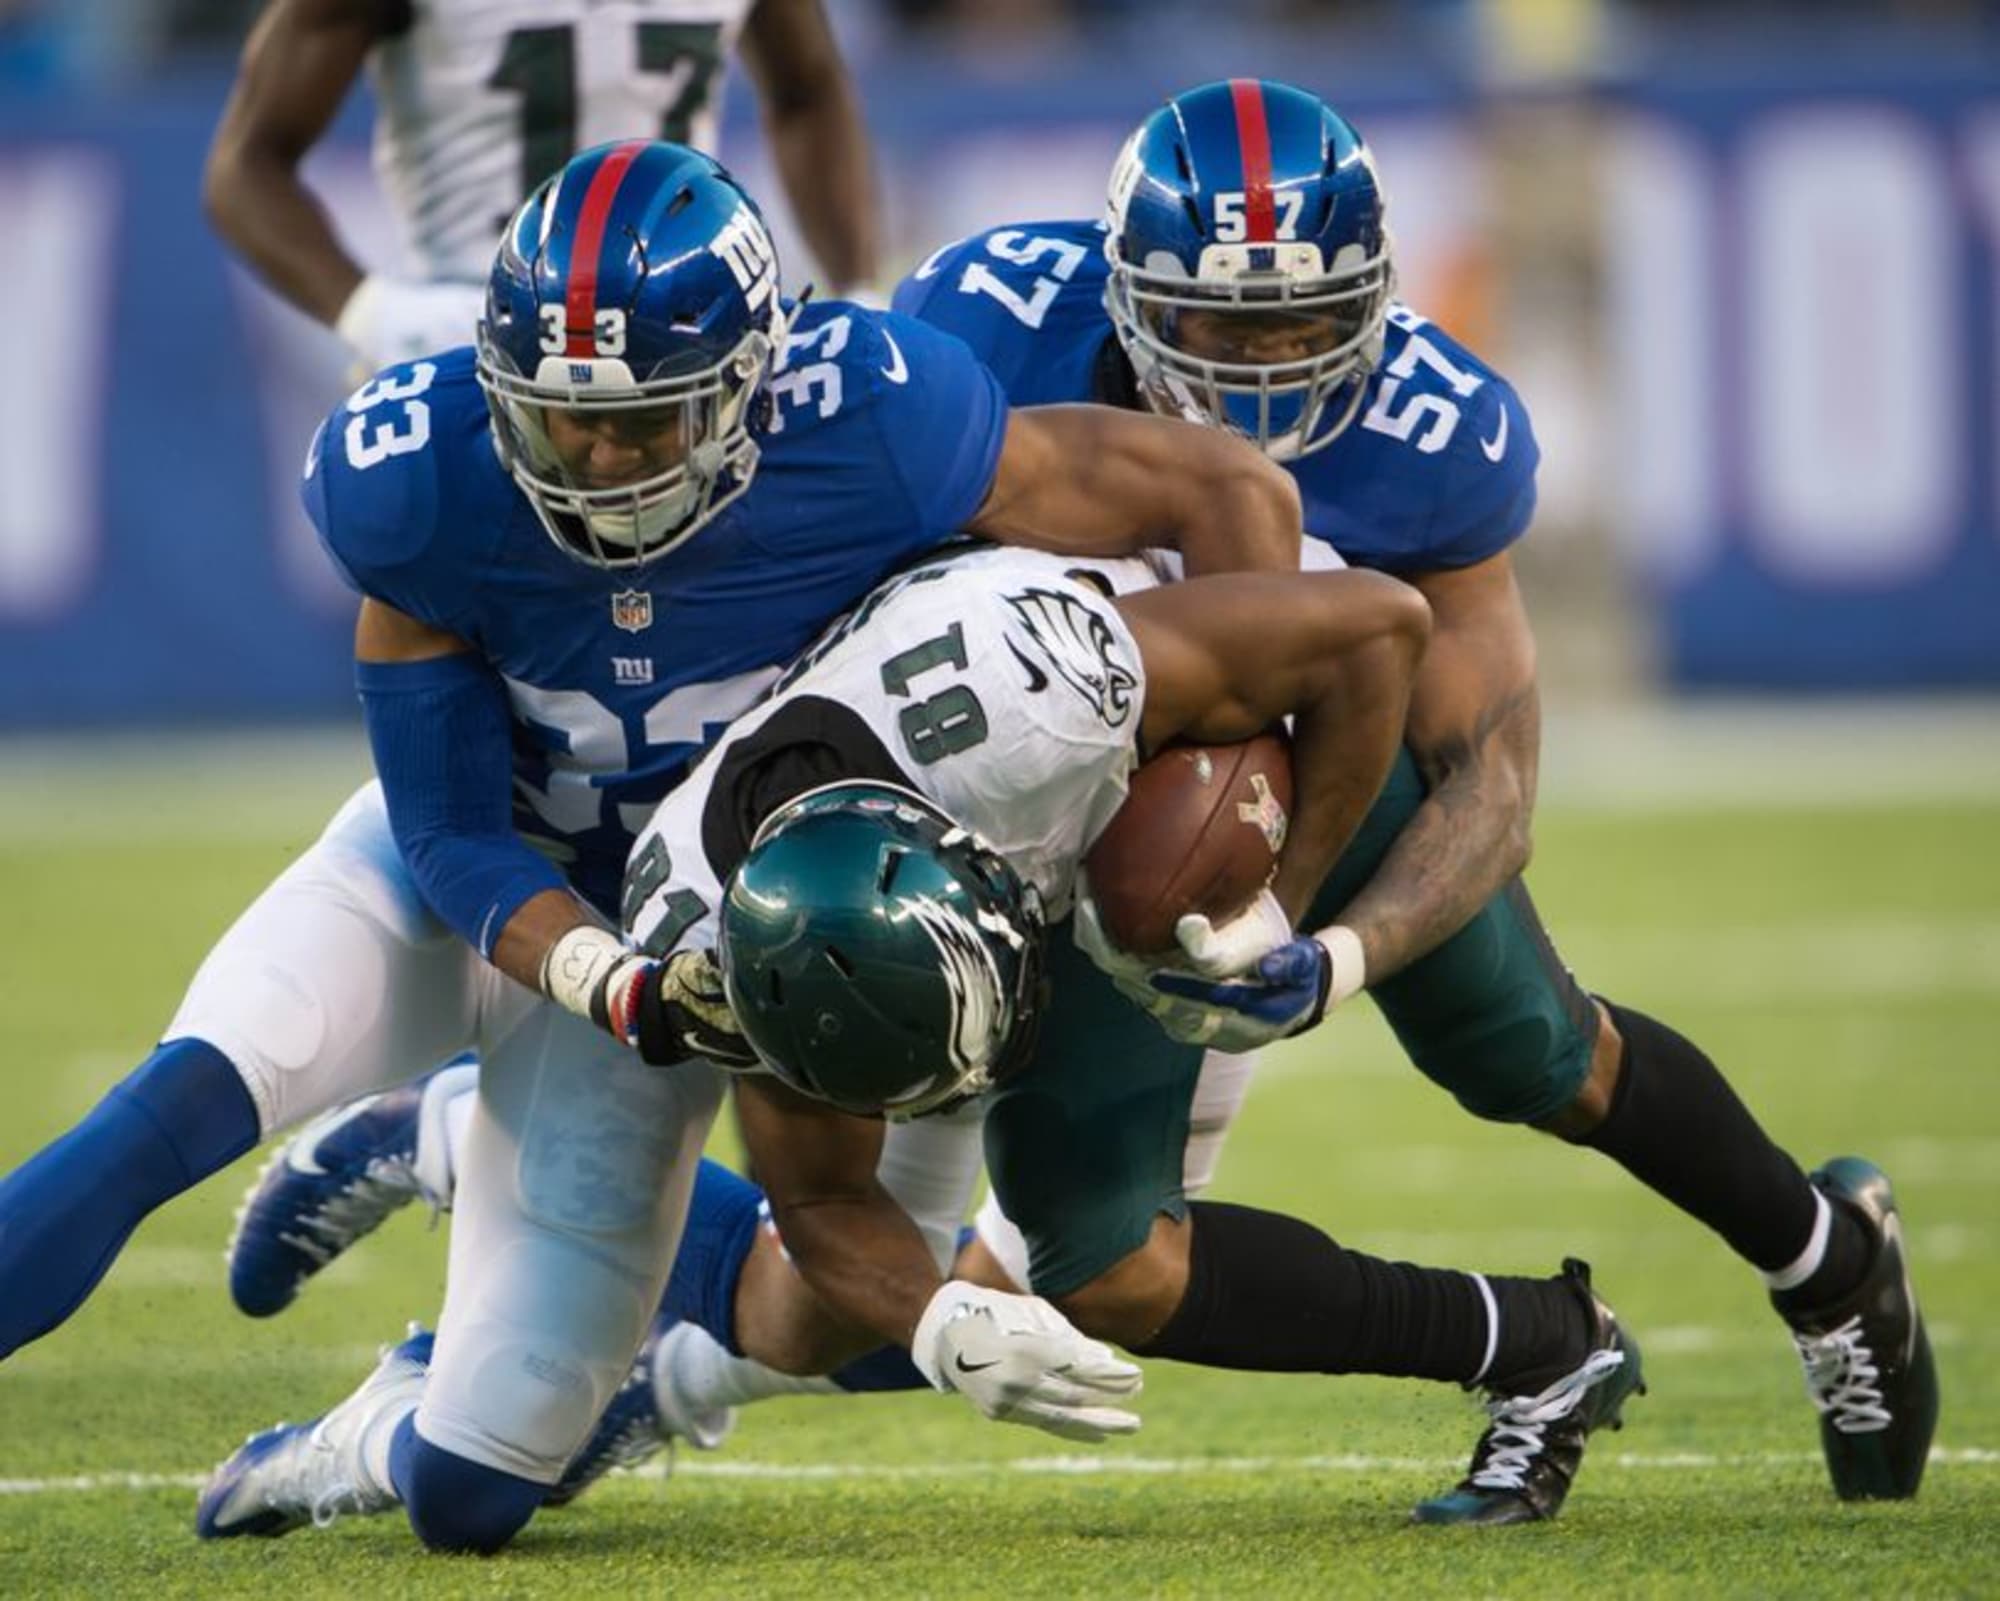 NFL Playoffs: How to Watch Giants at Eagles Live Without Cable on